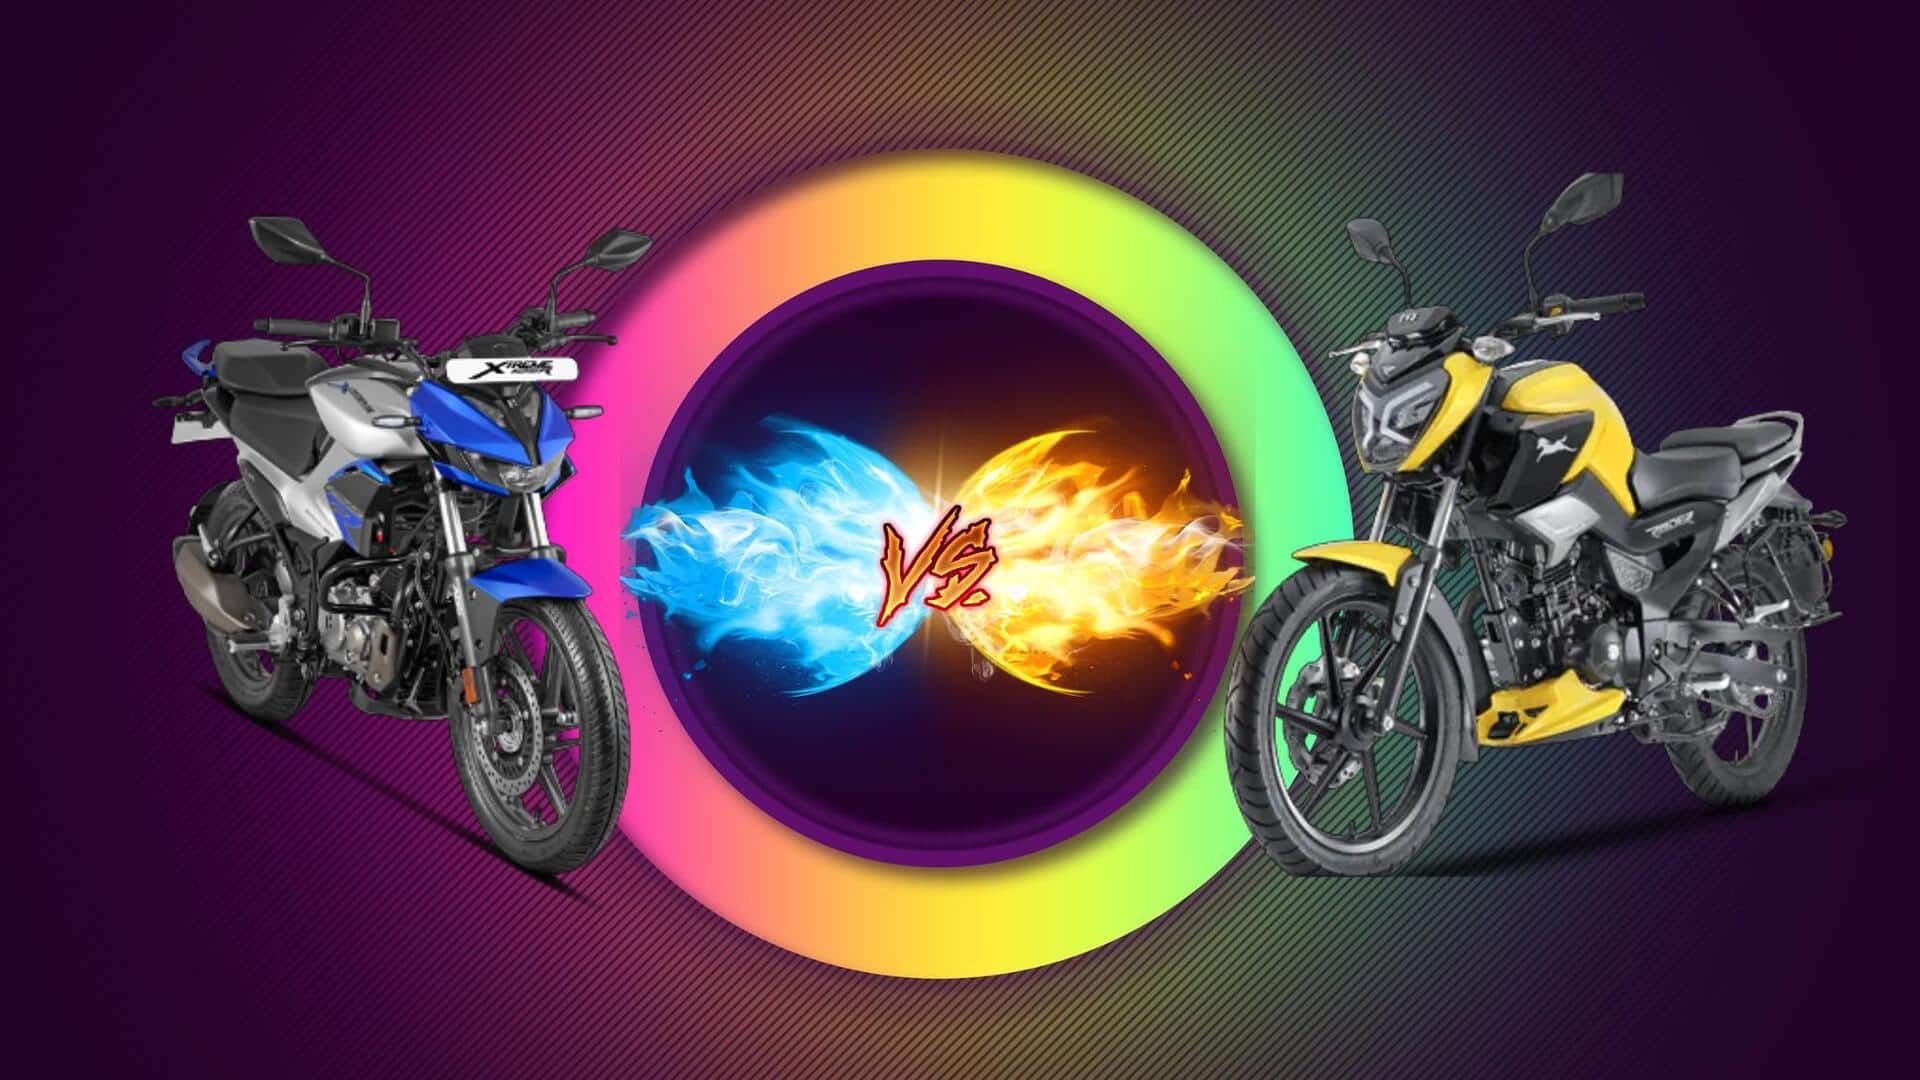 Hero Xtreme 125R or TVS Raider 125: Which is better